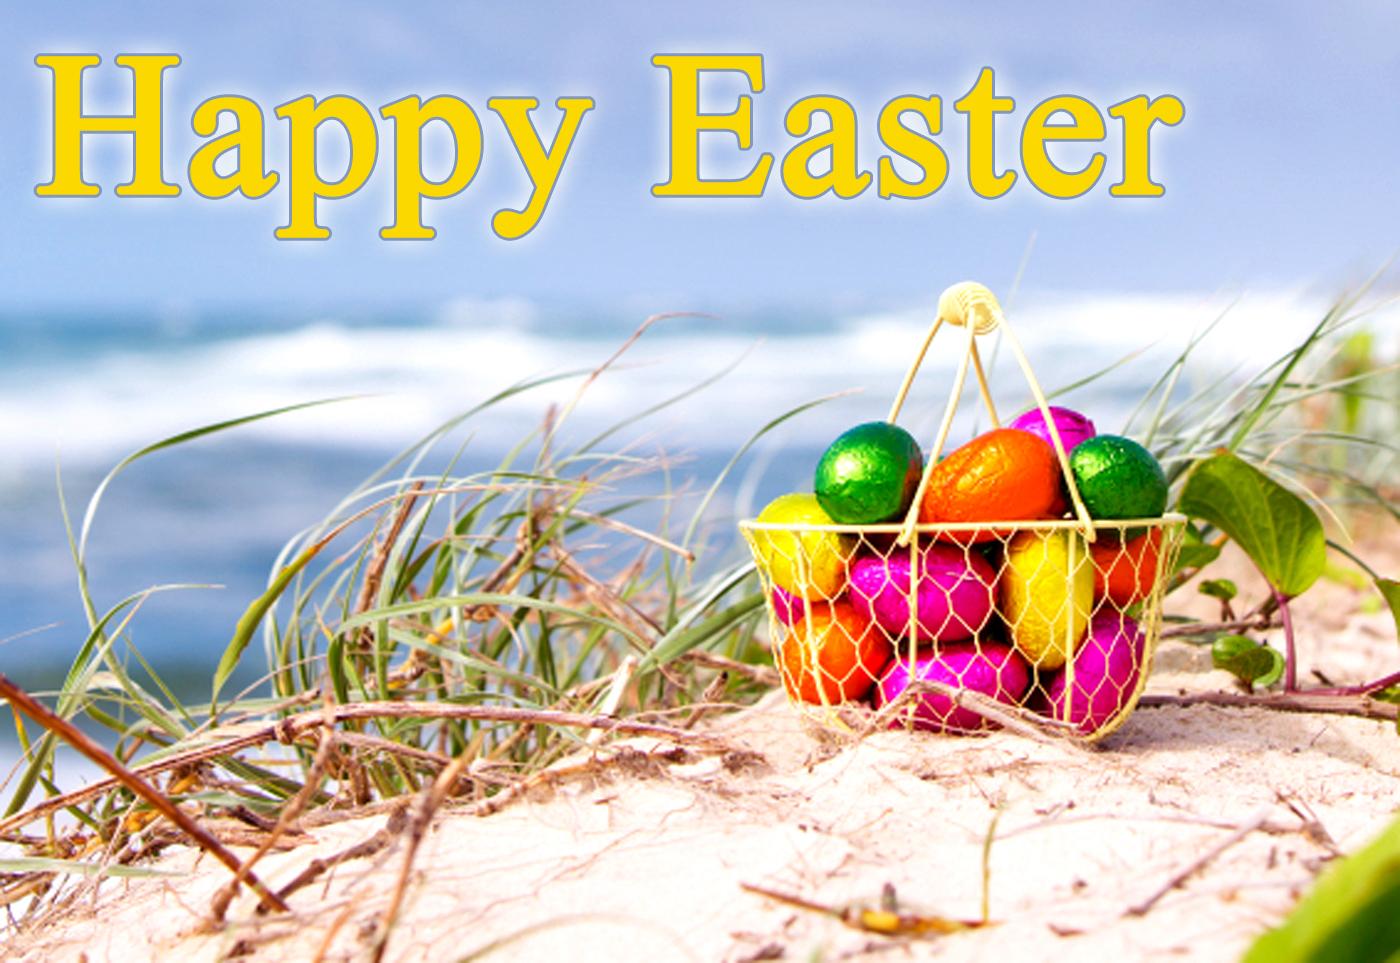 Easter Holiday Greeting Cards, Wallpaper, E Cards For Friends And Family